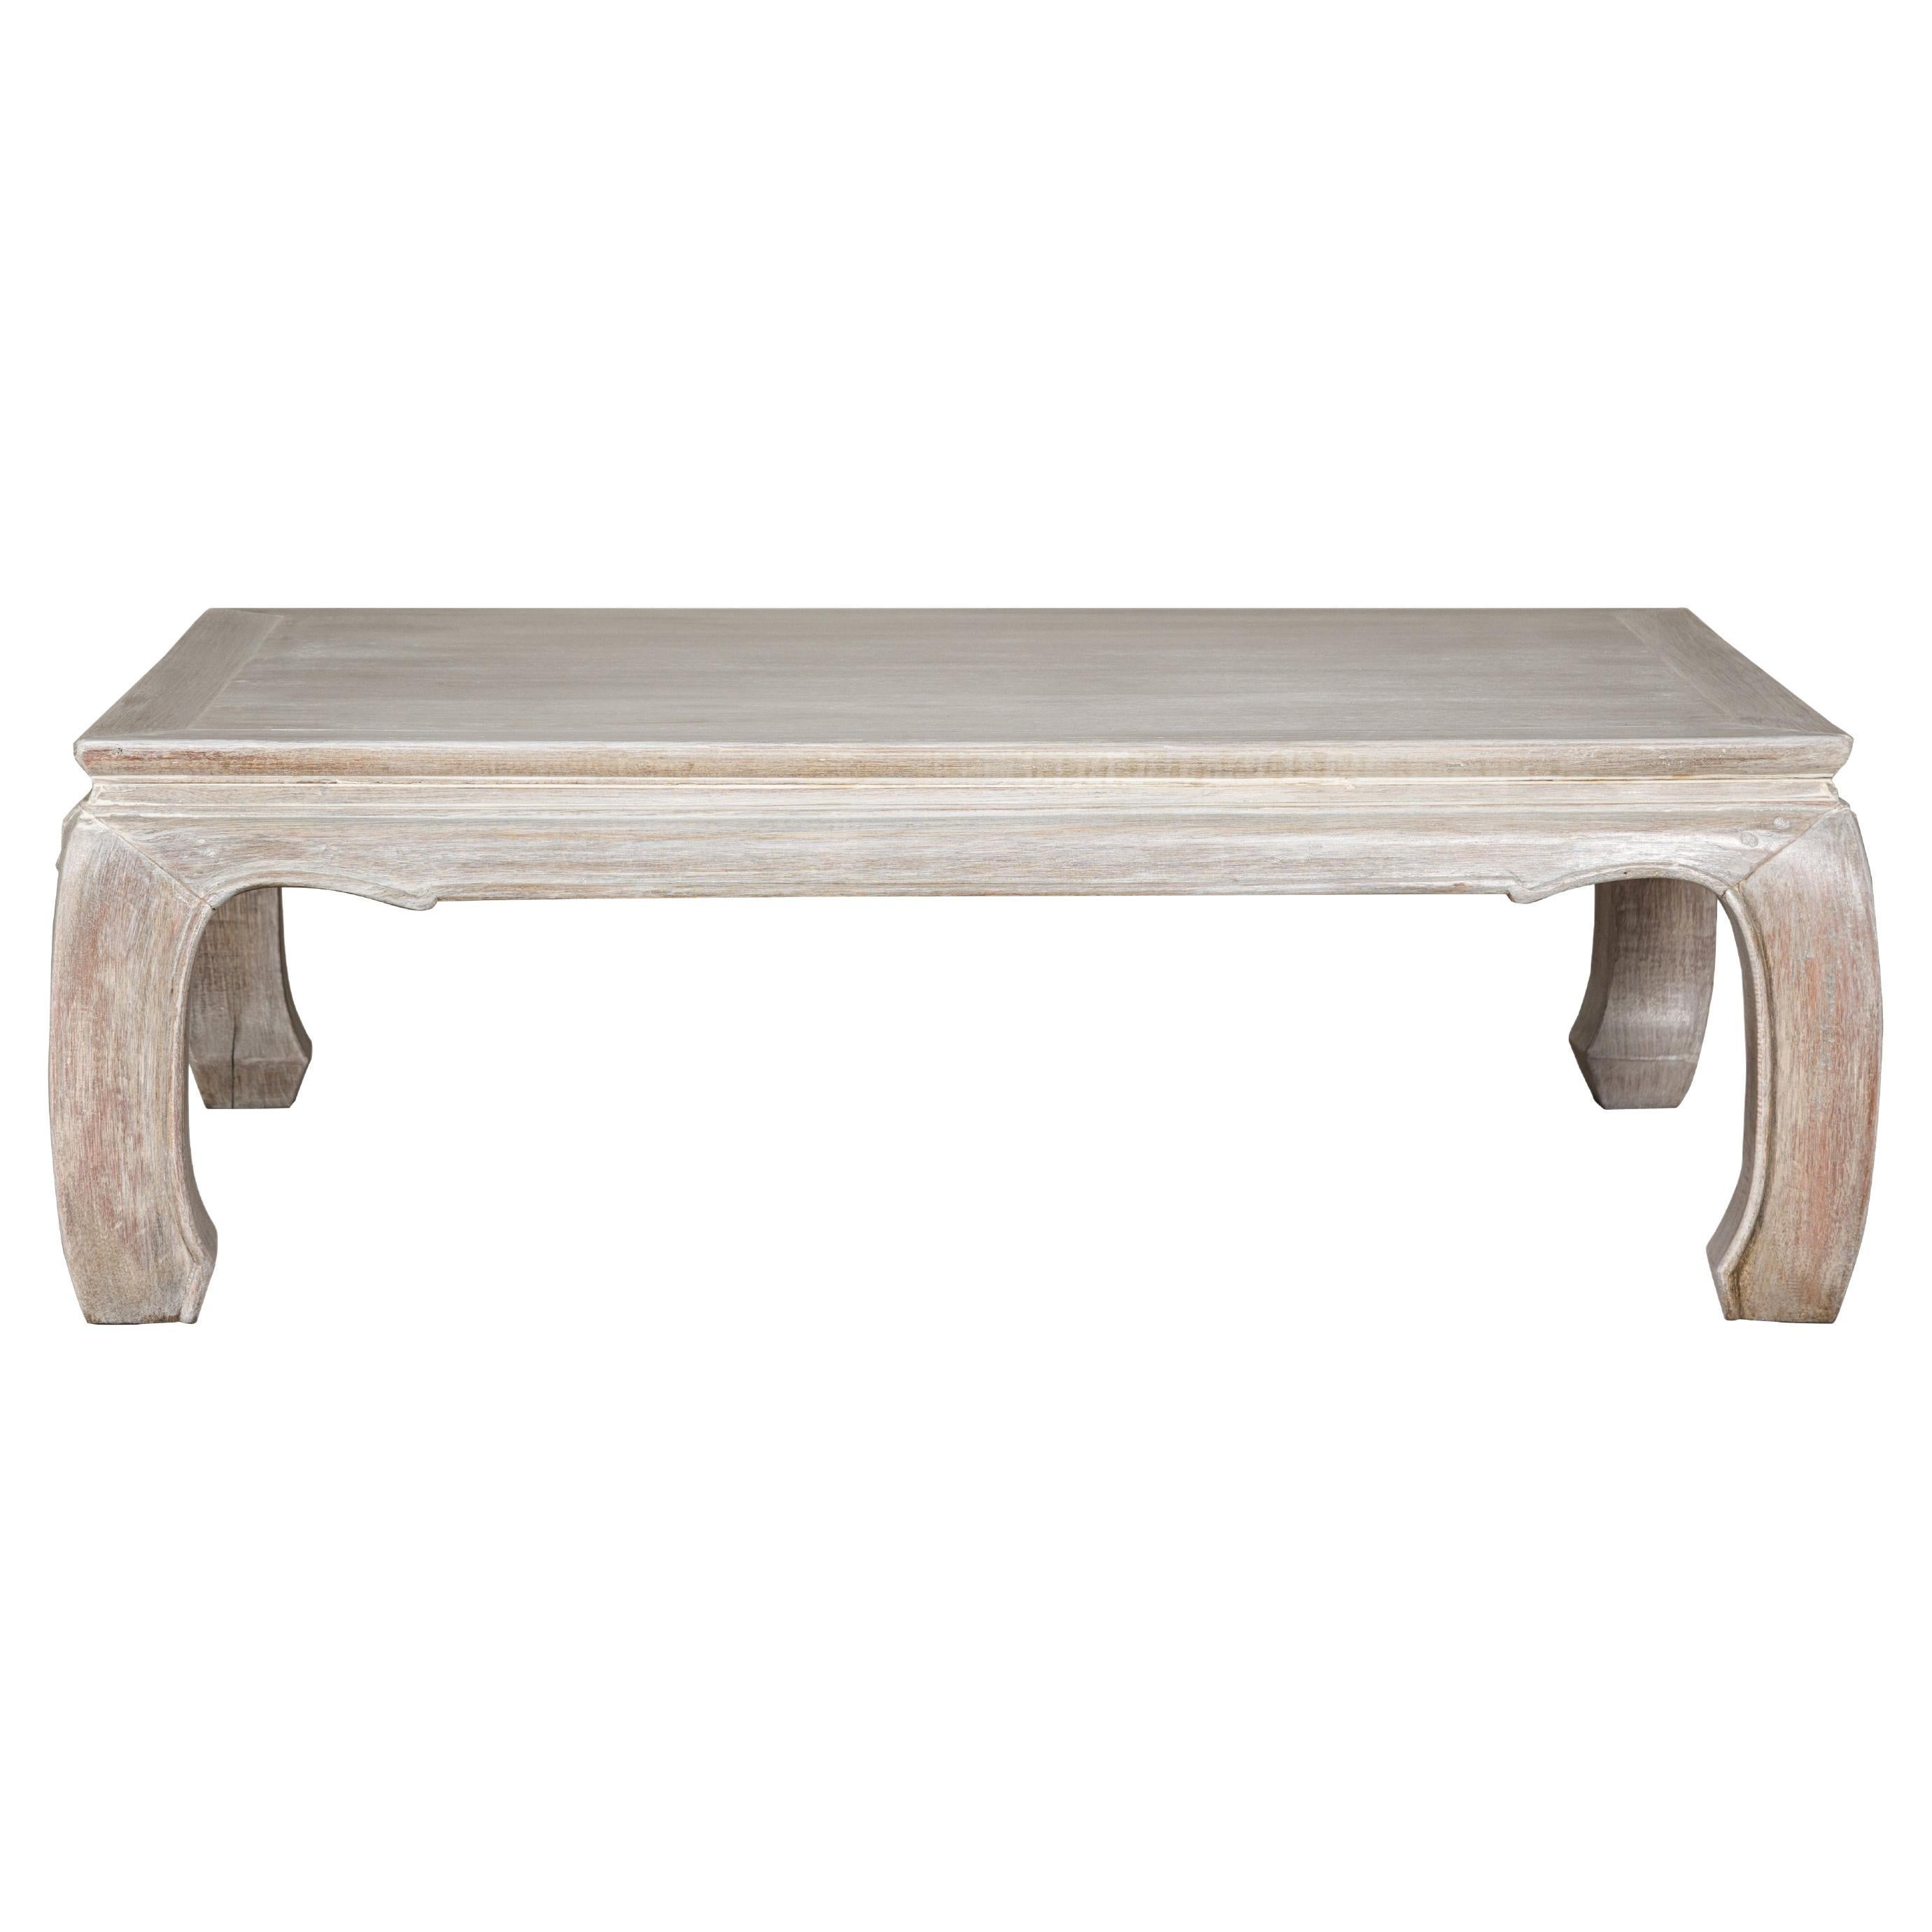 Teak Ming Style Whitewash Coffee Table with Chow Legs and Carved Apron For Sale